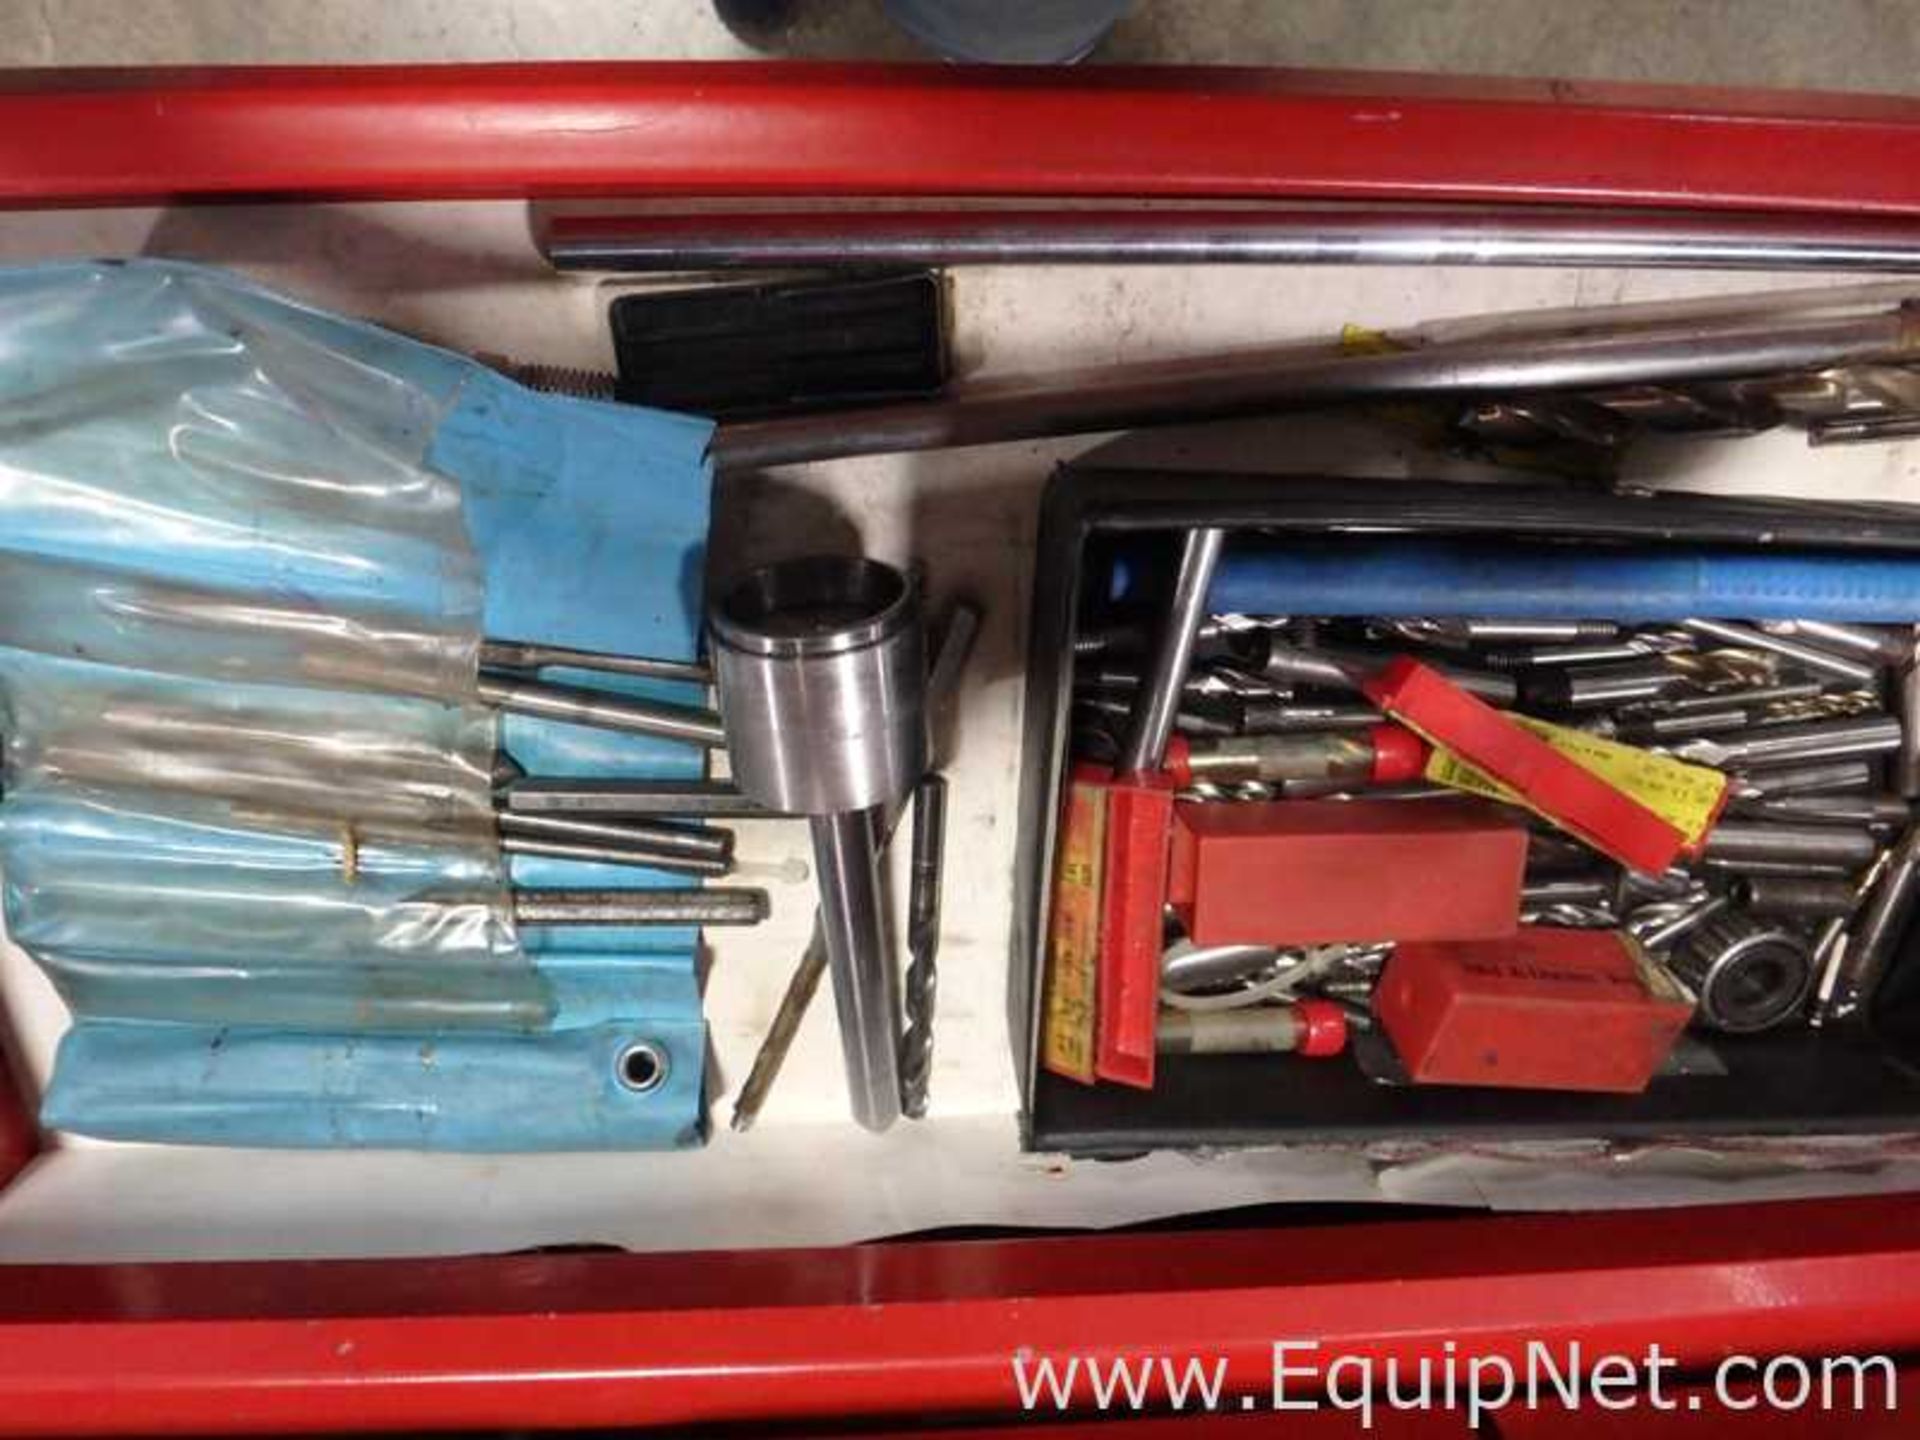 EQUIPNET LISTING #835371; REMOVAL COST: $15; DESCRIPTION: Tool Chest with Some ToolsSee Photos - Image 3 of 8